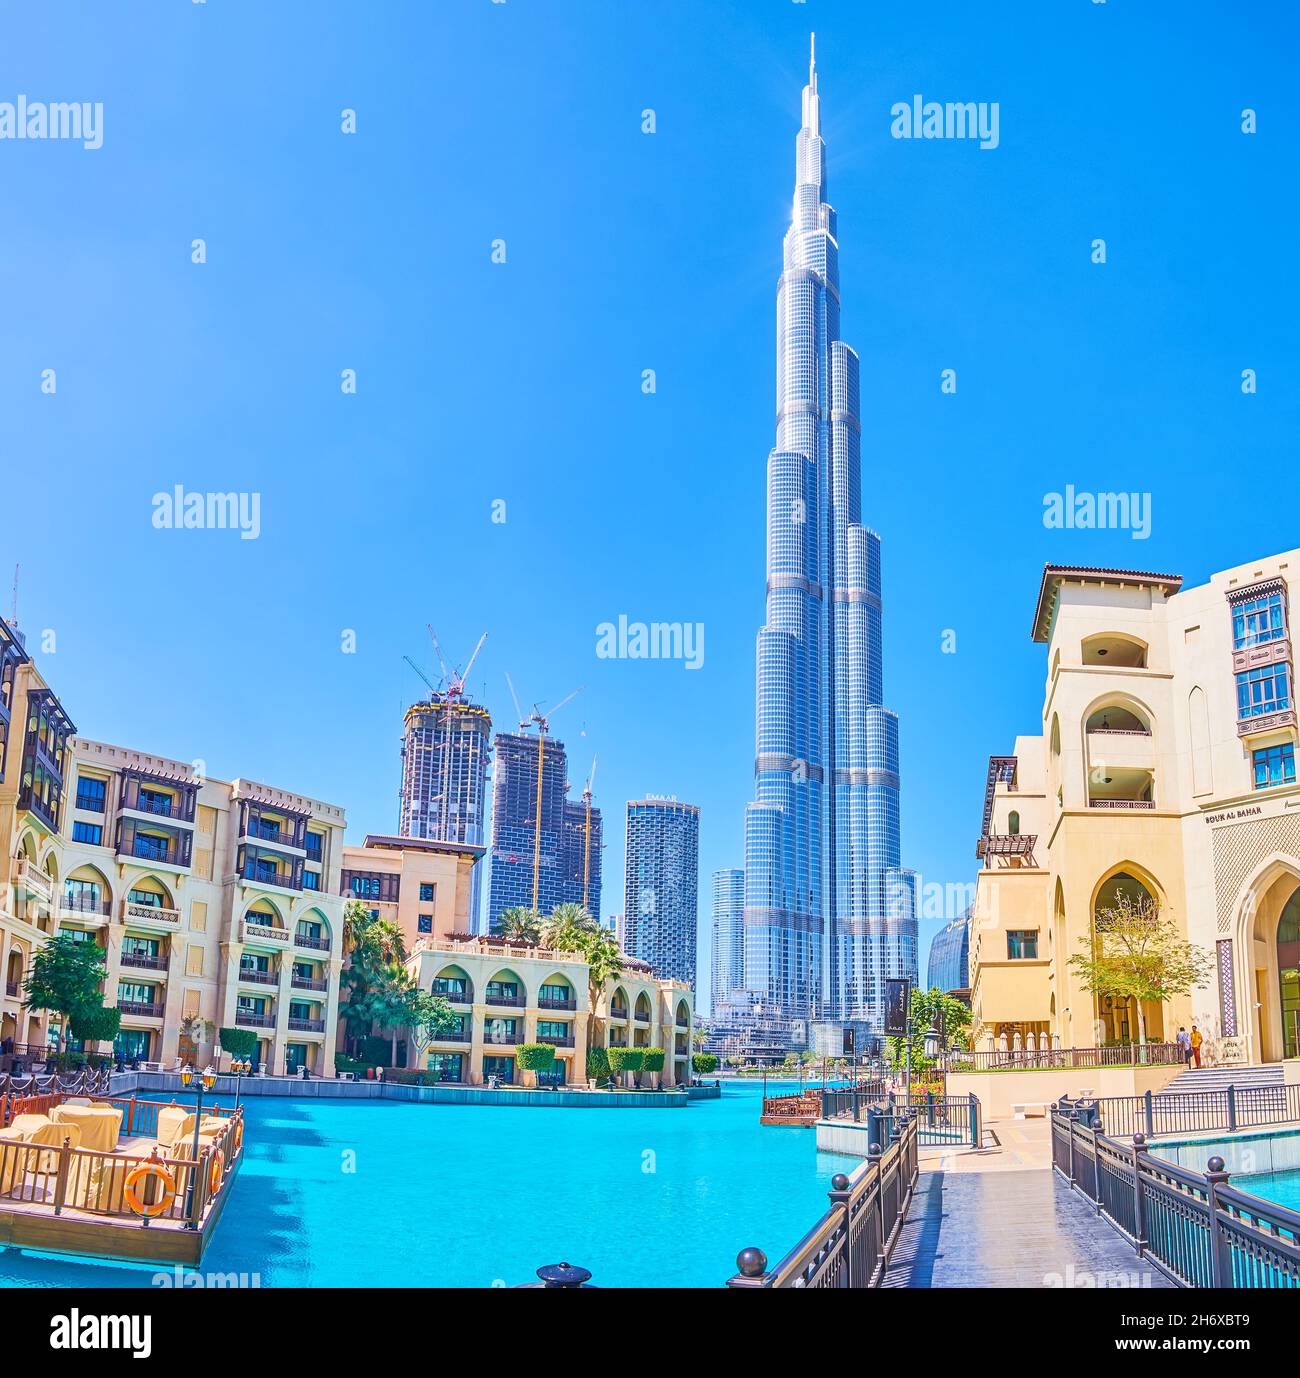 DUBAI, UAE - MARCH 3, 2020: Scenic vernacular Arabic styled Old Town Island complex and modern Burj Khalifa tower on background, on March 3 in Dubai Stock Photo